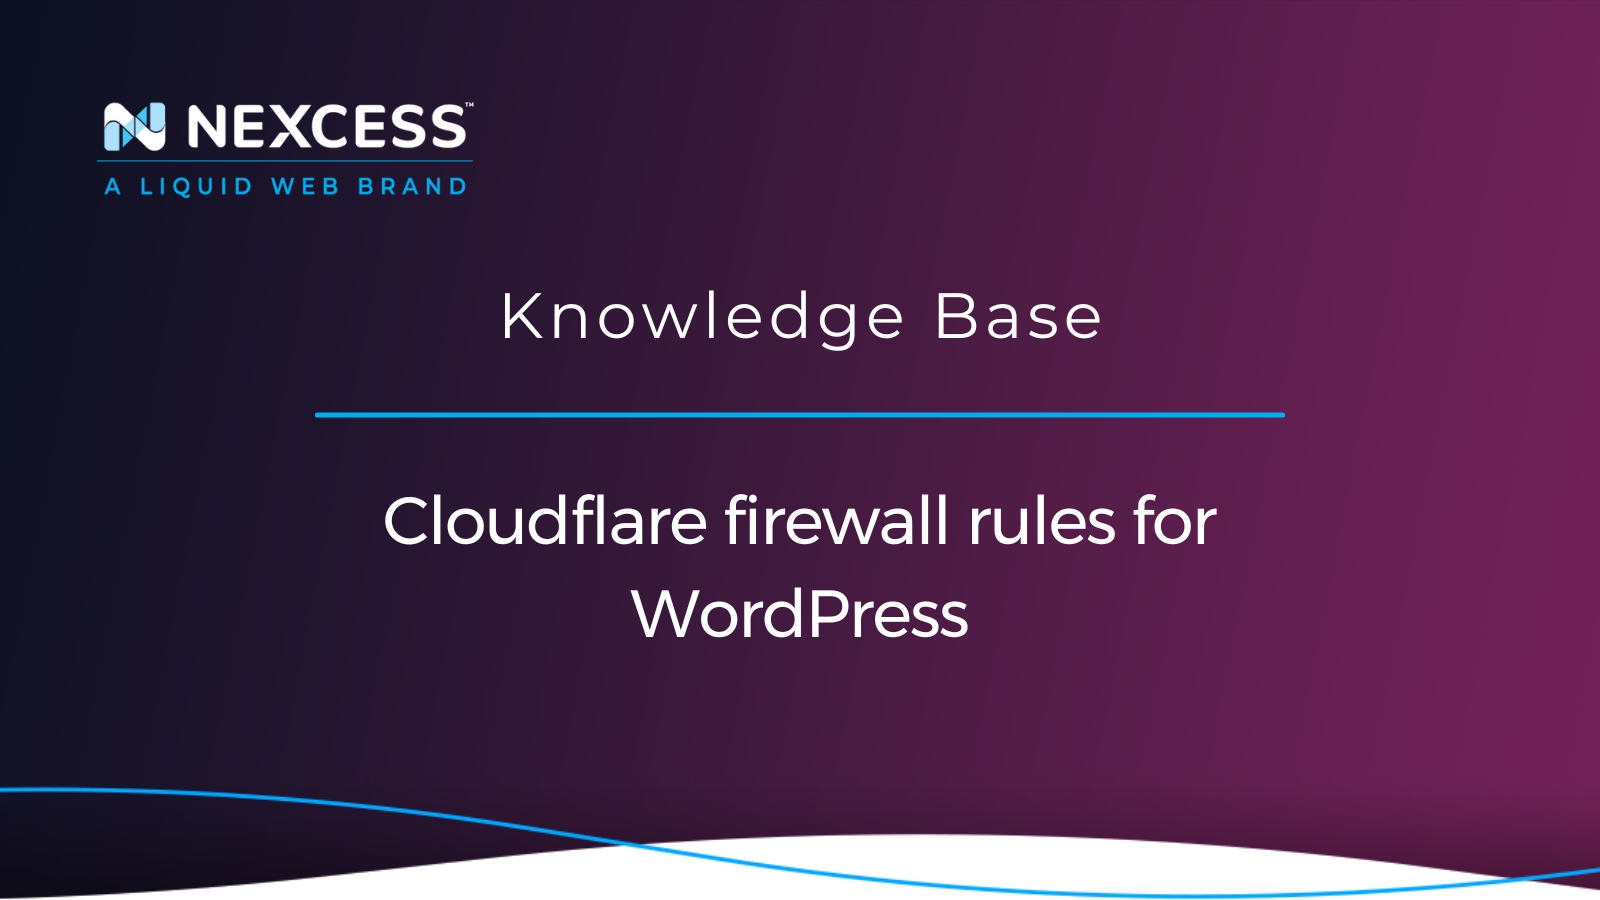 Cloudflare firewall rules for WordPress